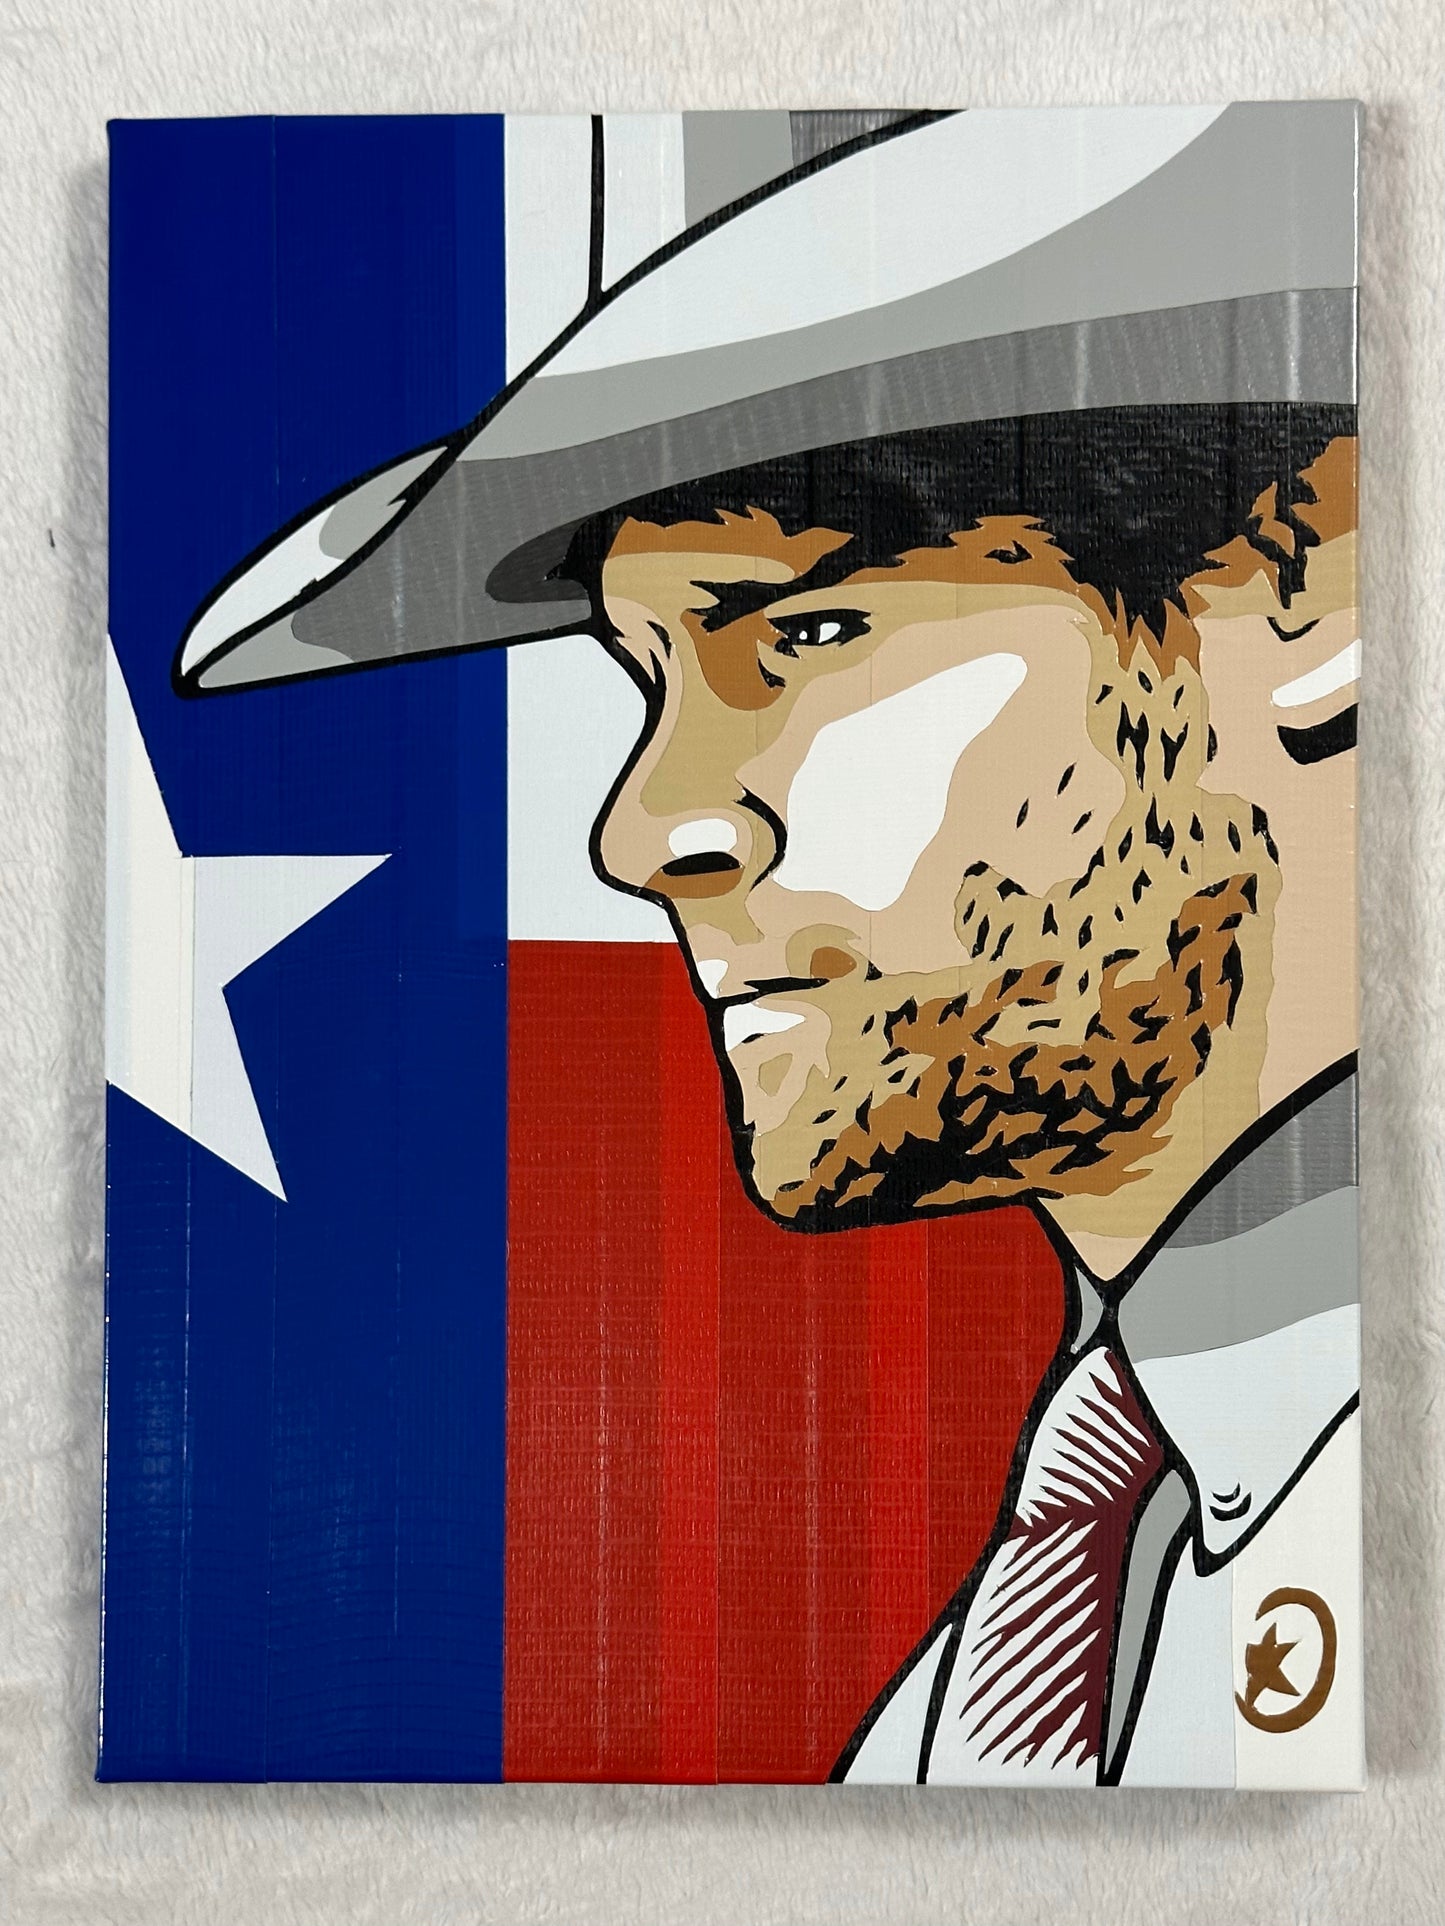 An image of Jared Padalecki as Walker from the TV series. Behind his face is the Texas flag. The image is created from colored duct tape.